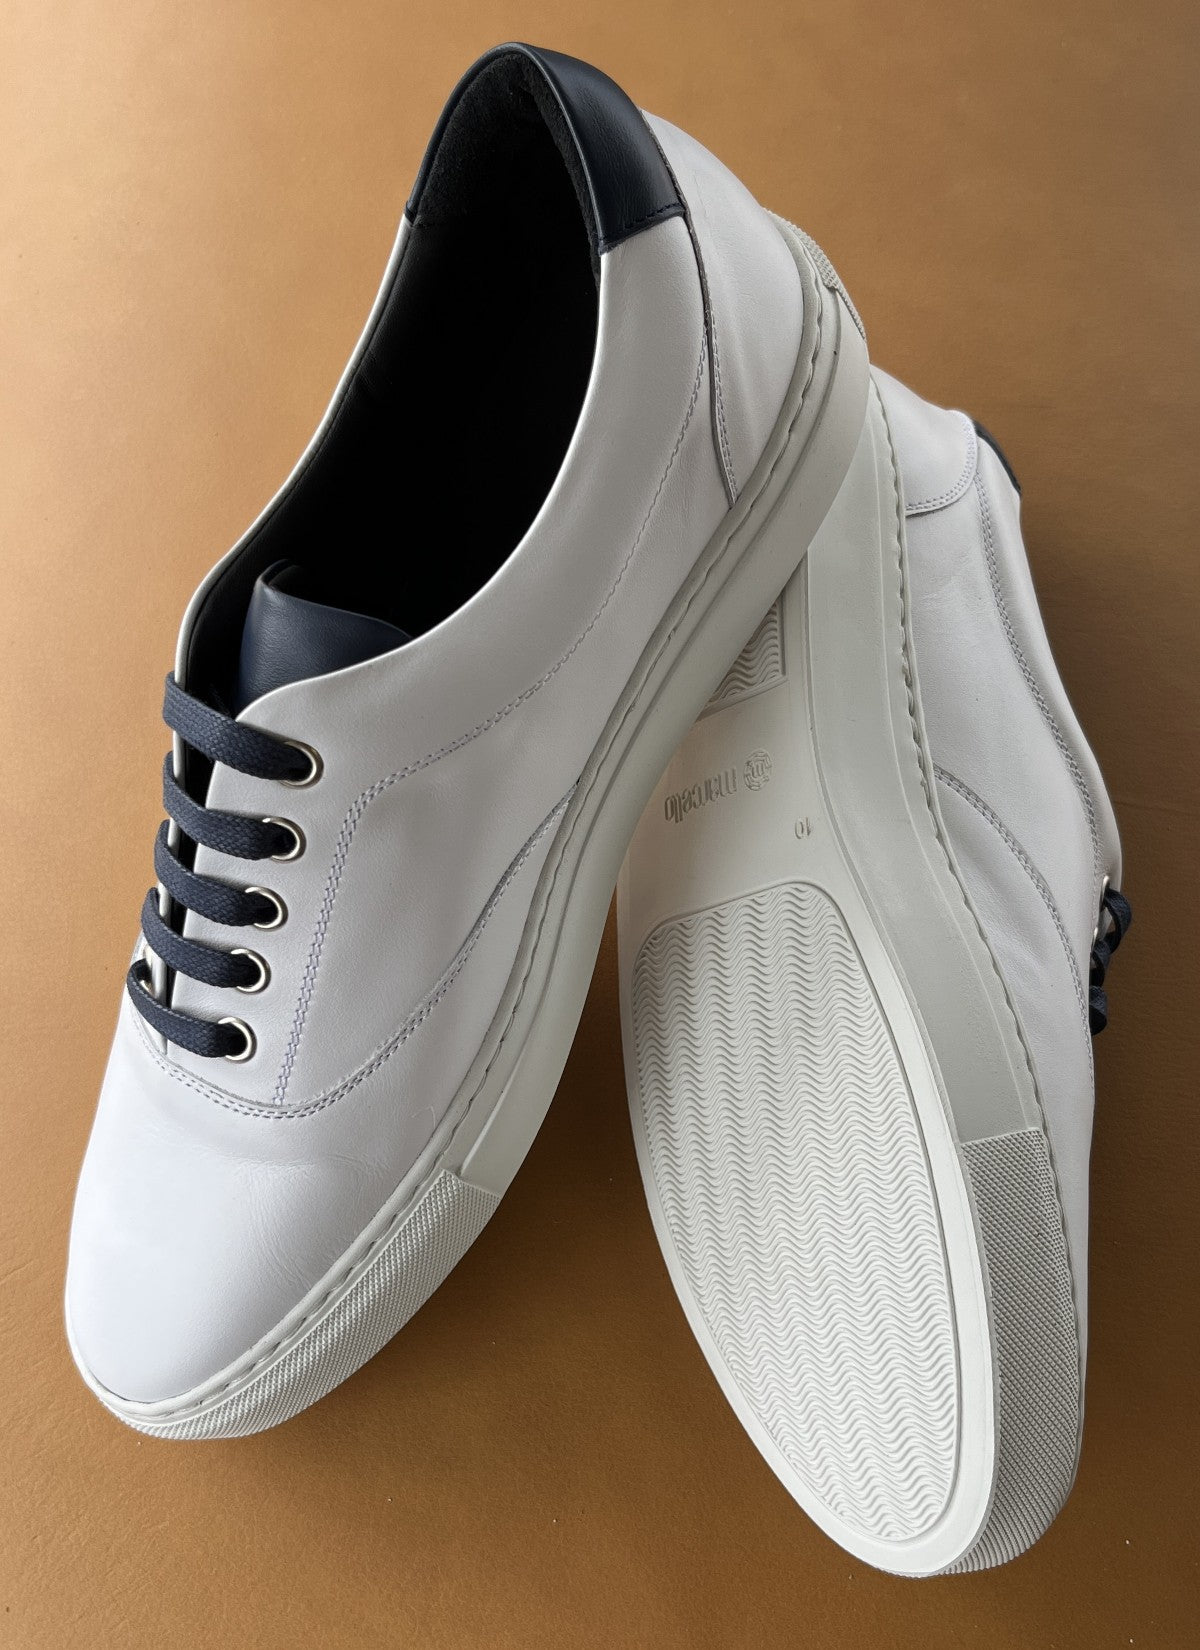 Add style to your favorite outfit with a cool soft leather sneaker in white with navy accent leather on the tongue and back heel.  Soft foot bed for a comfortable feel and clean style. Firm sole for structure and comfort. Perfect for around the town or at the office.  Classic fit and hand made in Spain. By Marcello Sport